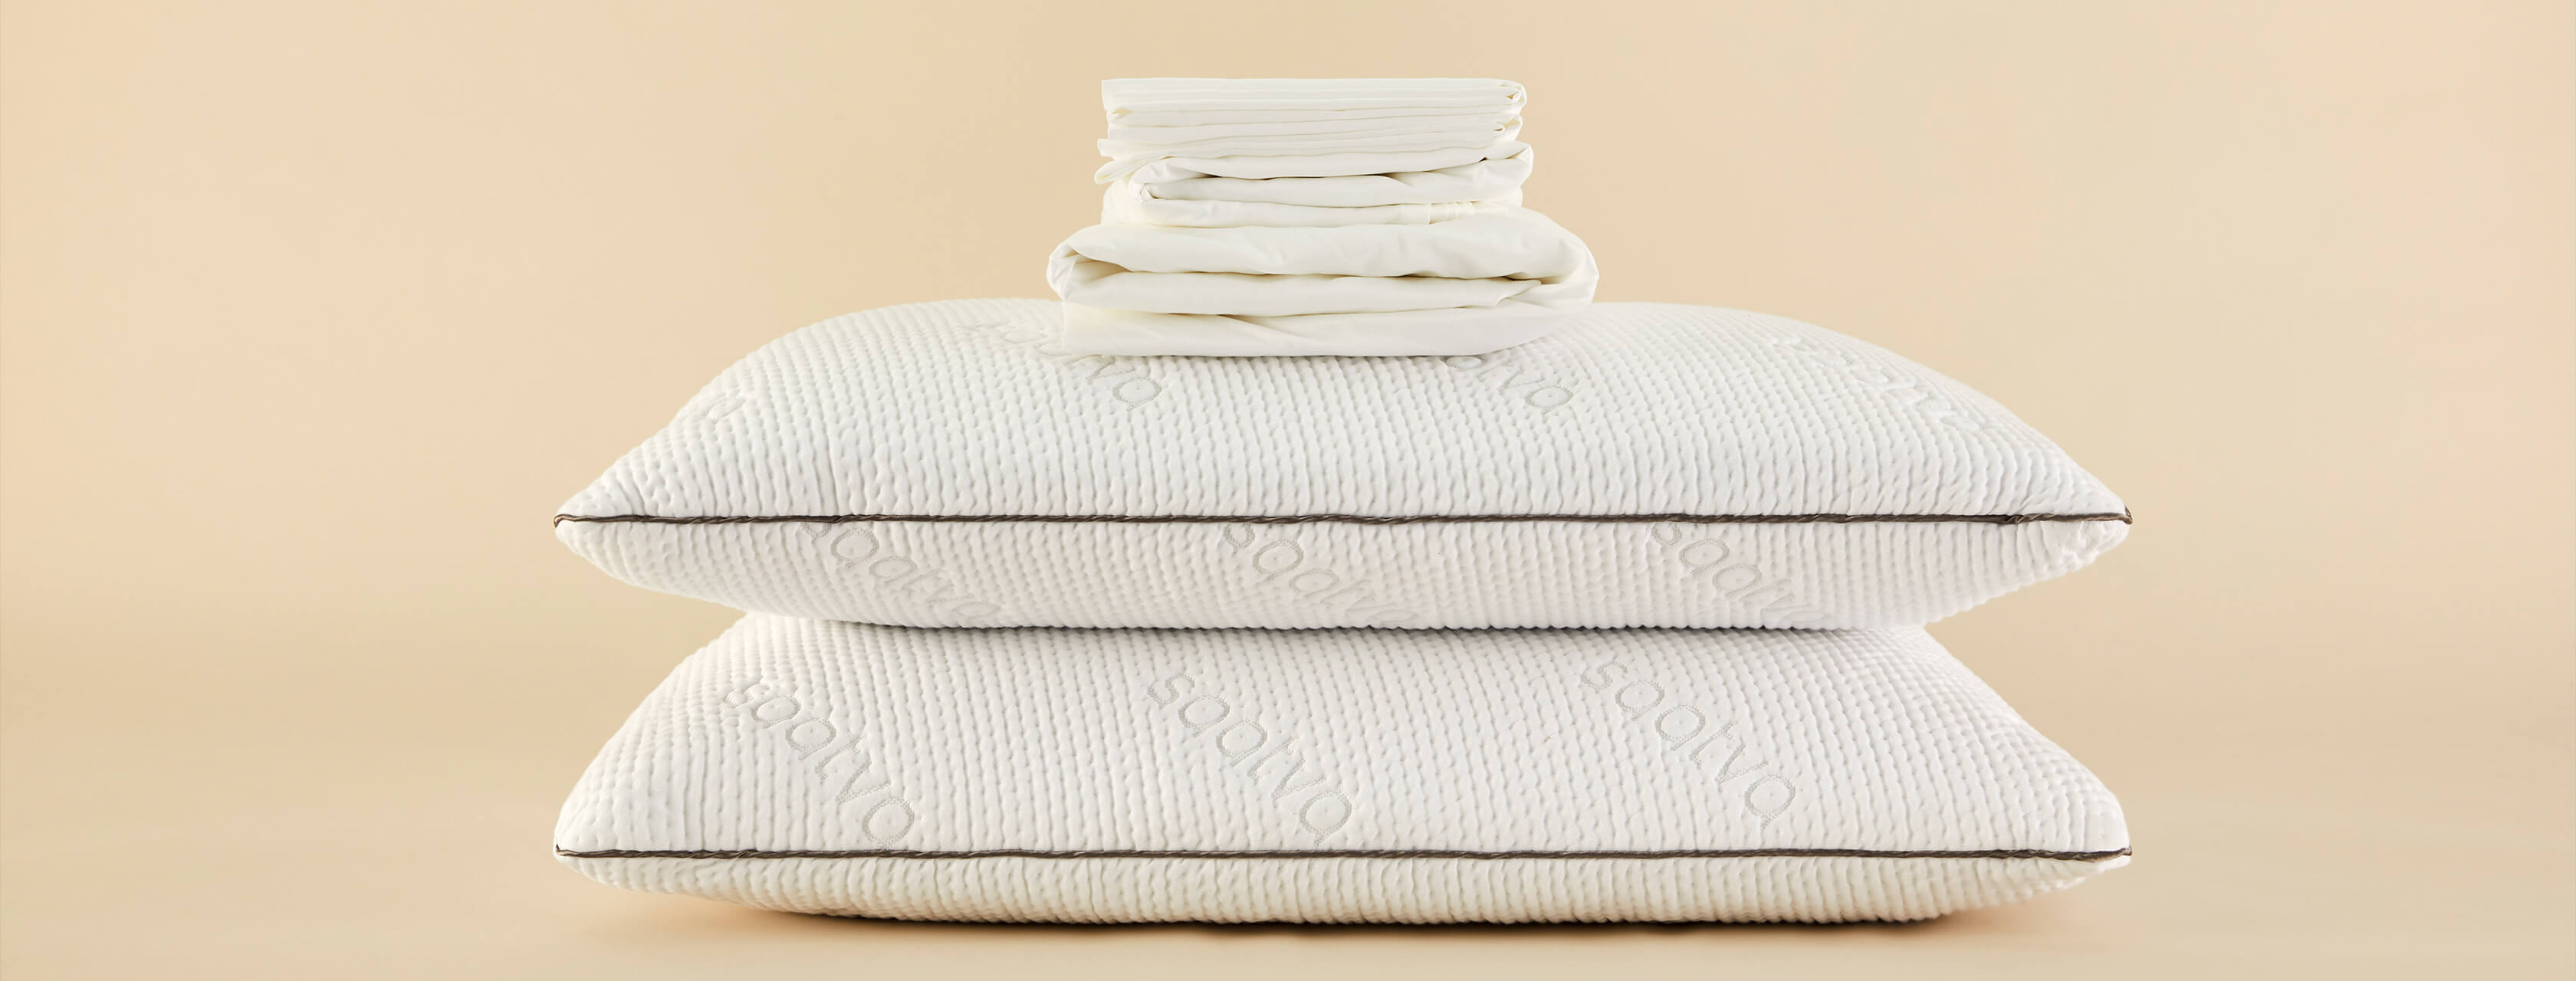 Stacked bedding products